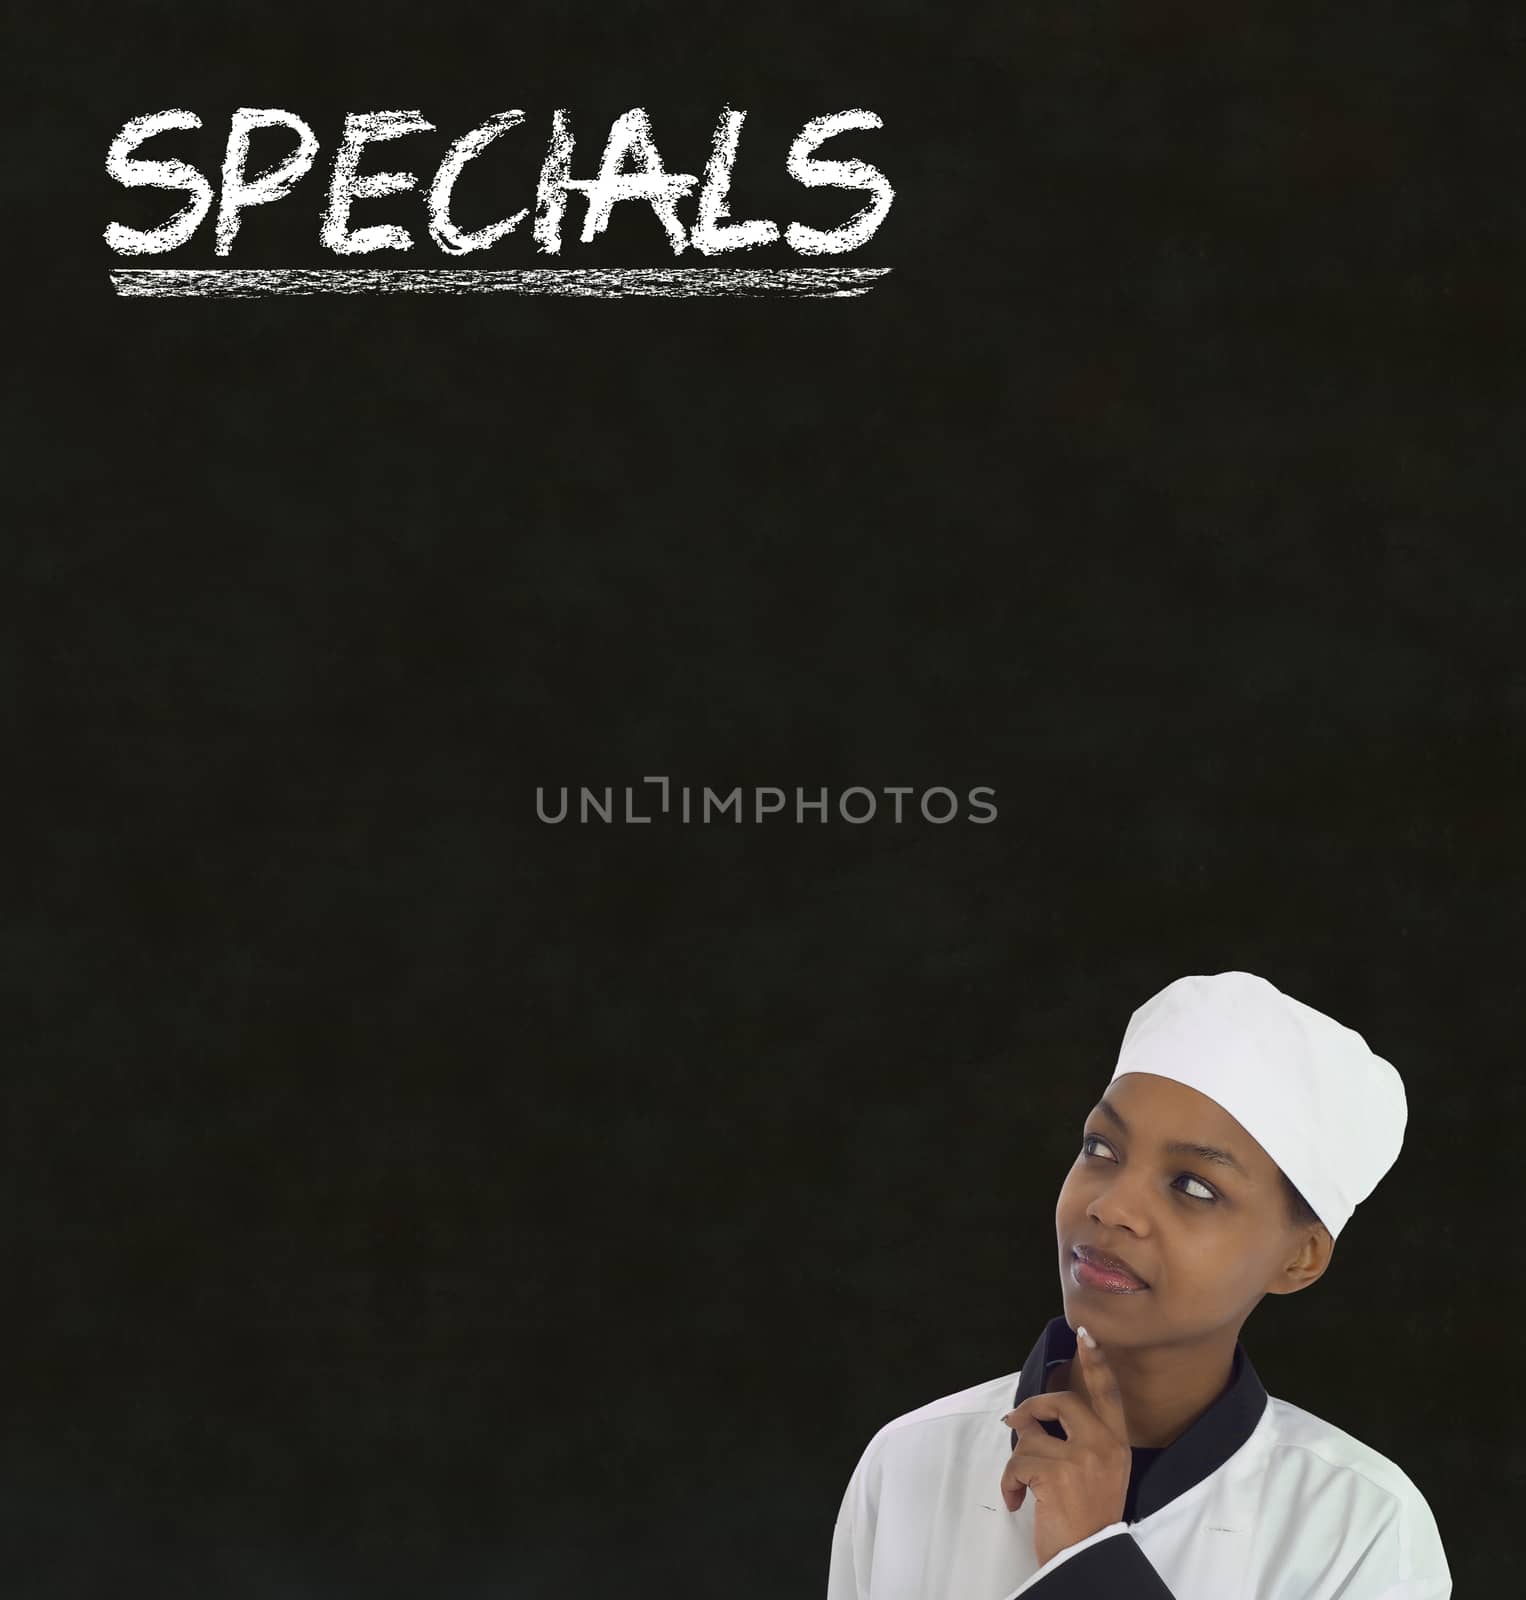 African American woman chef with chalk specials sign on blackboard background by alistaircotton